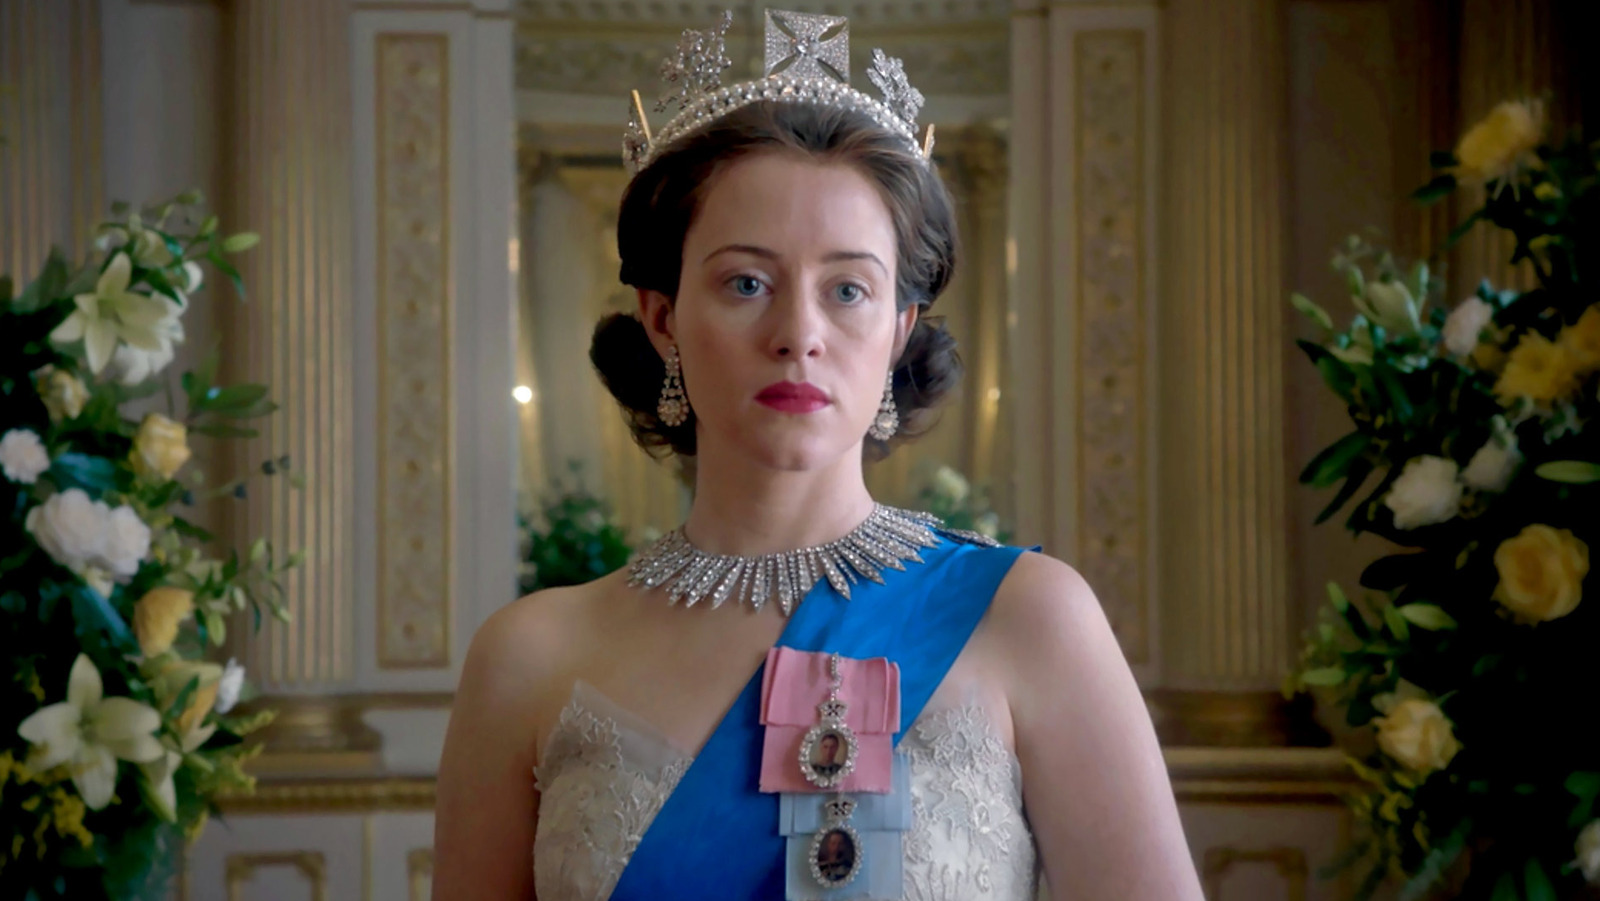 #The Crown Returns To The Netflix Top 10 Following Queen Elizabeth’s Death